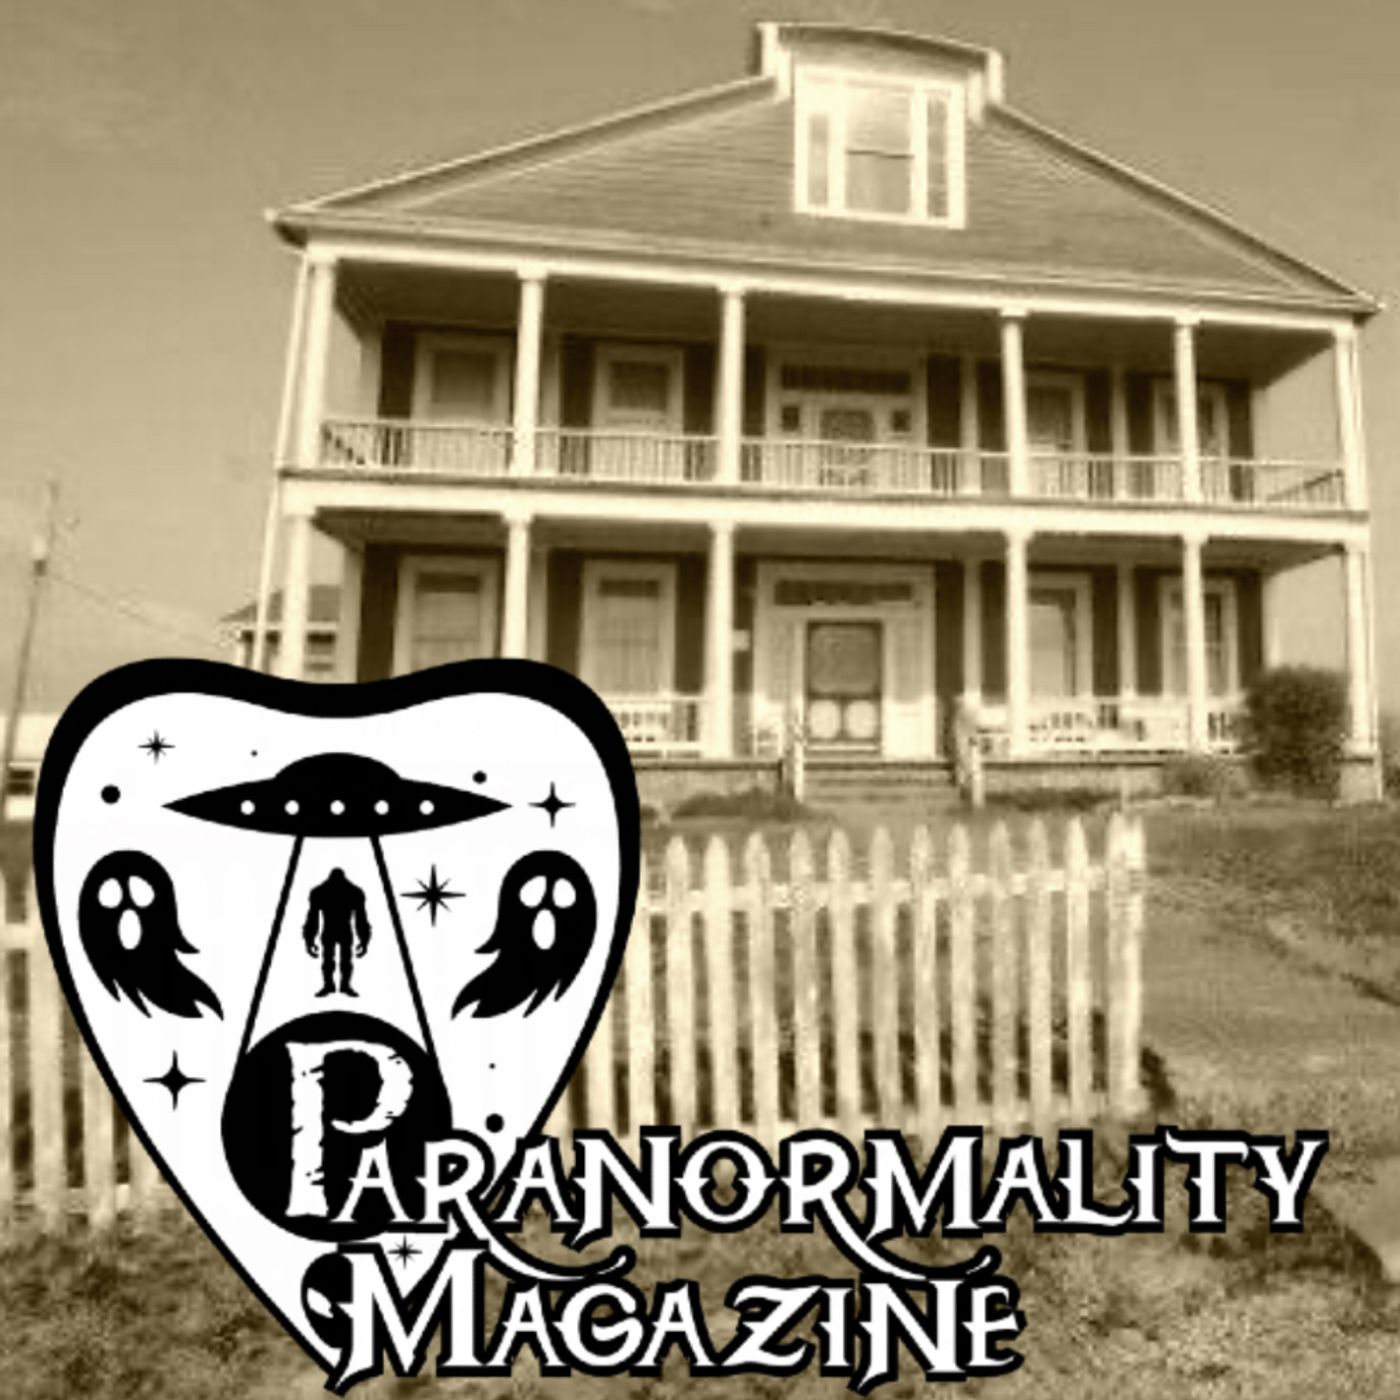 “THE HAUNTING OF CRENSHAW MANSION” and More Fortean-Related Stories! #ParanormalityMag